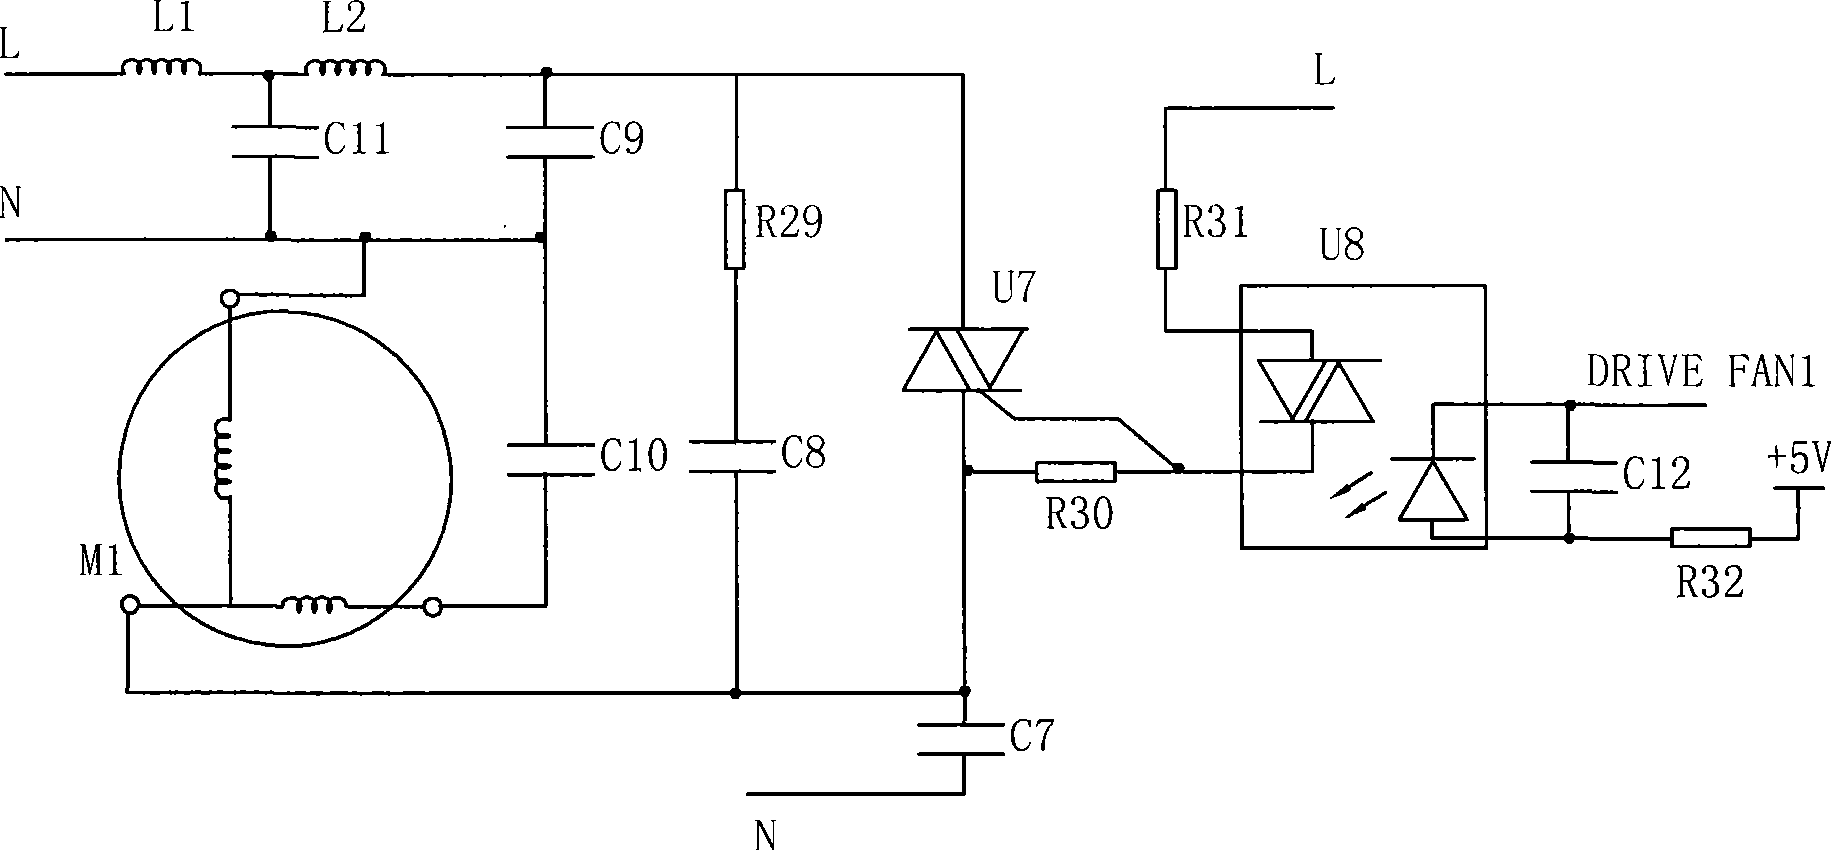 Control method of low voltage operating fixed speed air conditioner